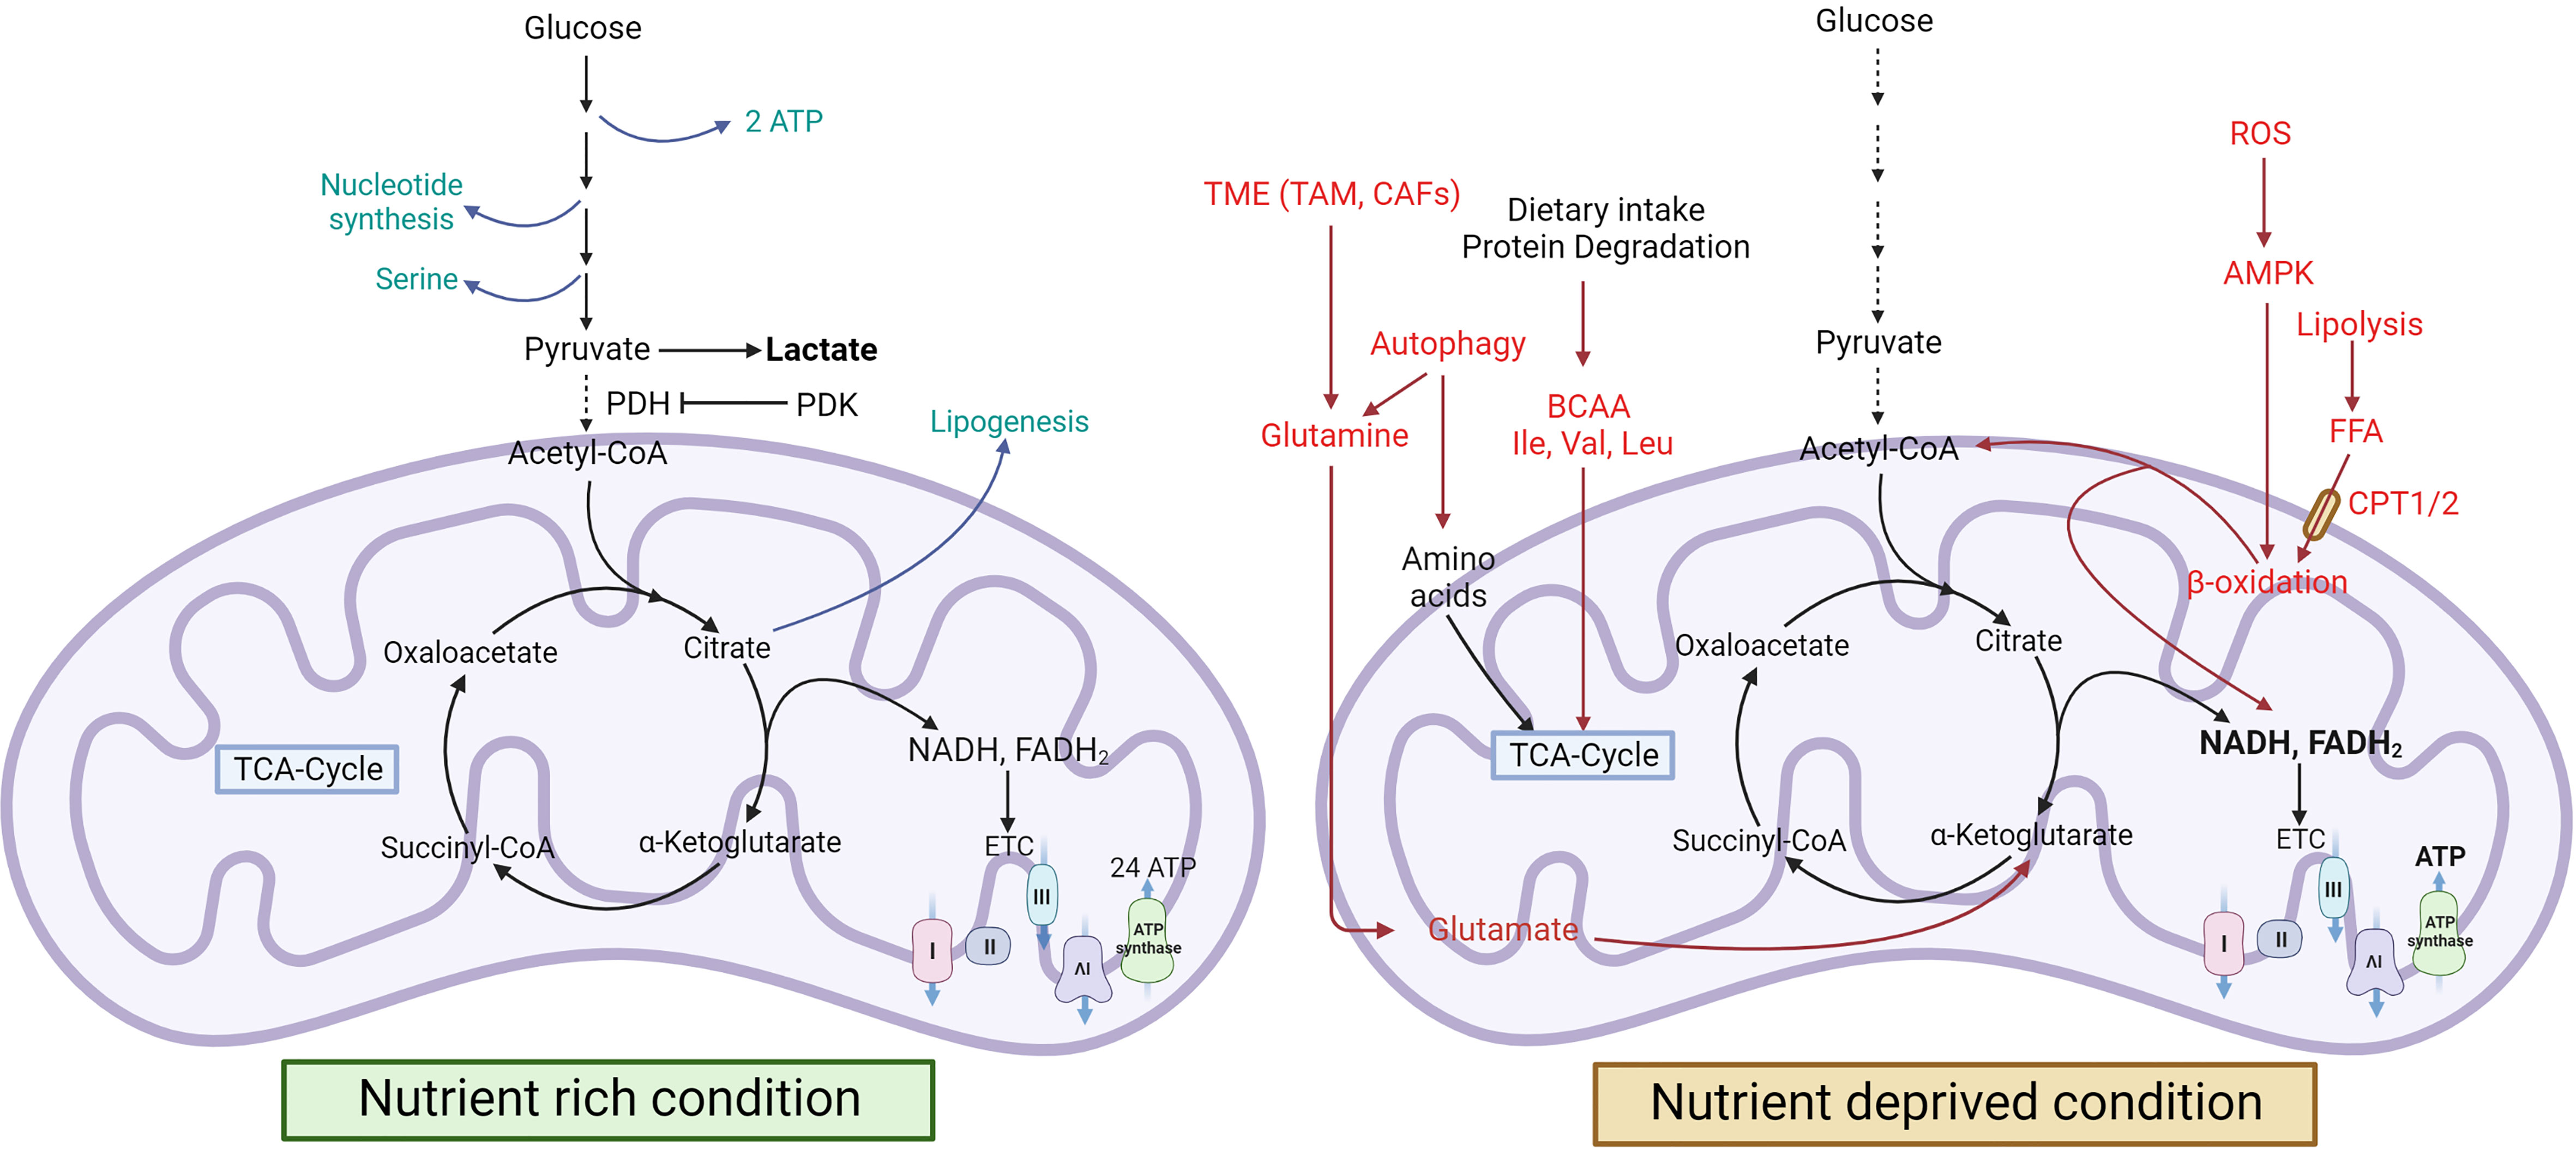 Frontiers | Targeting cancer-specific metabolic pathways for 